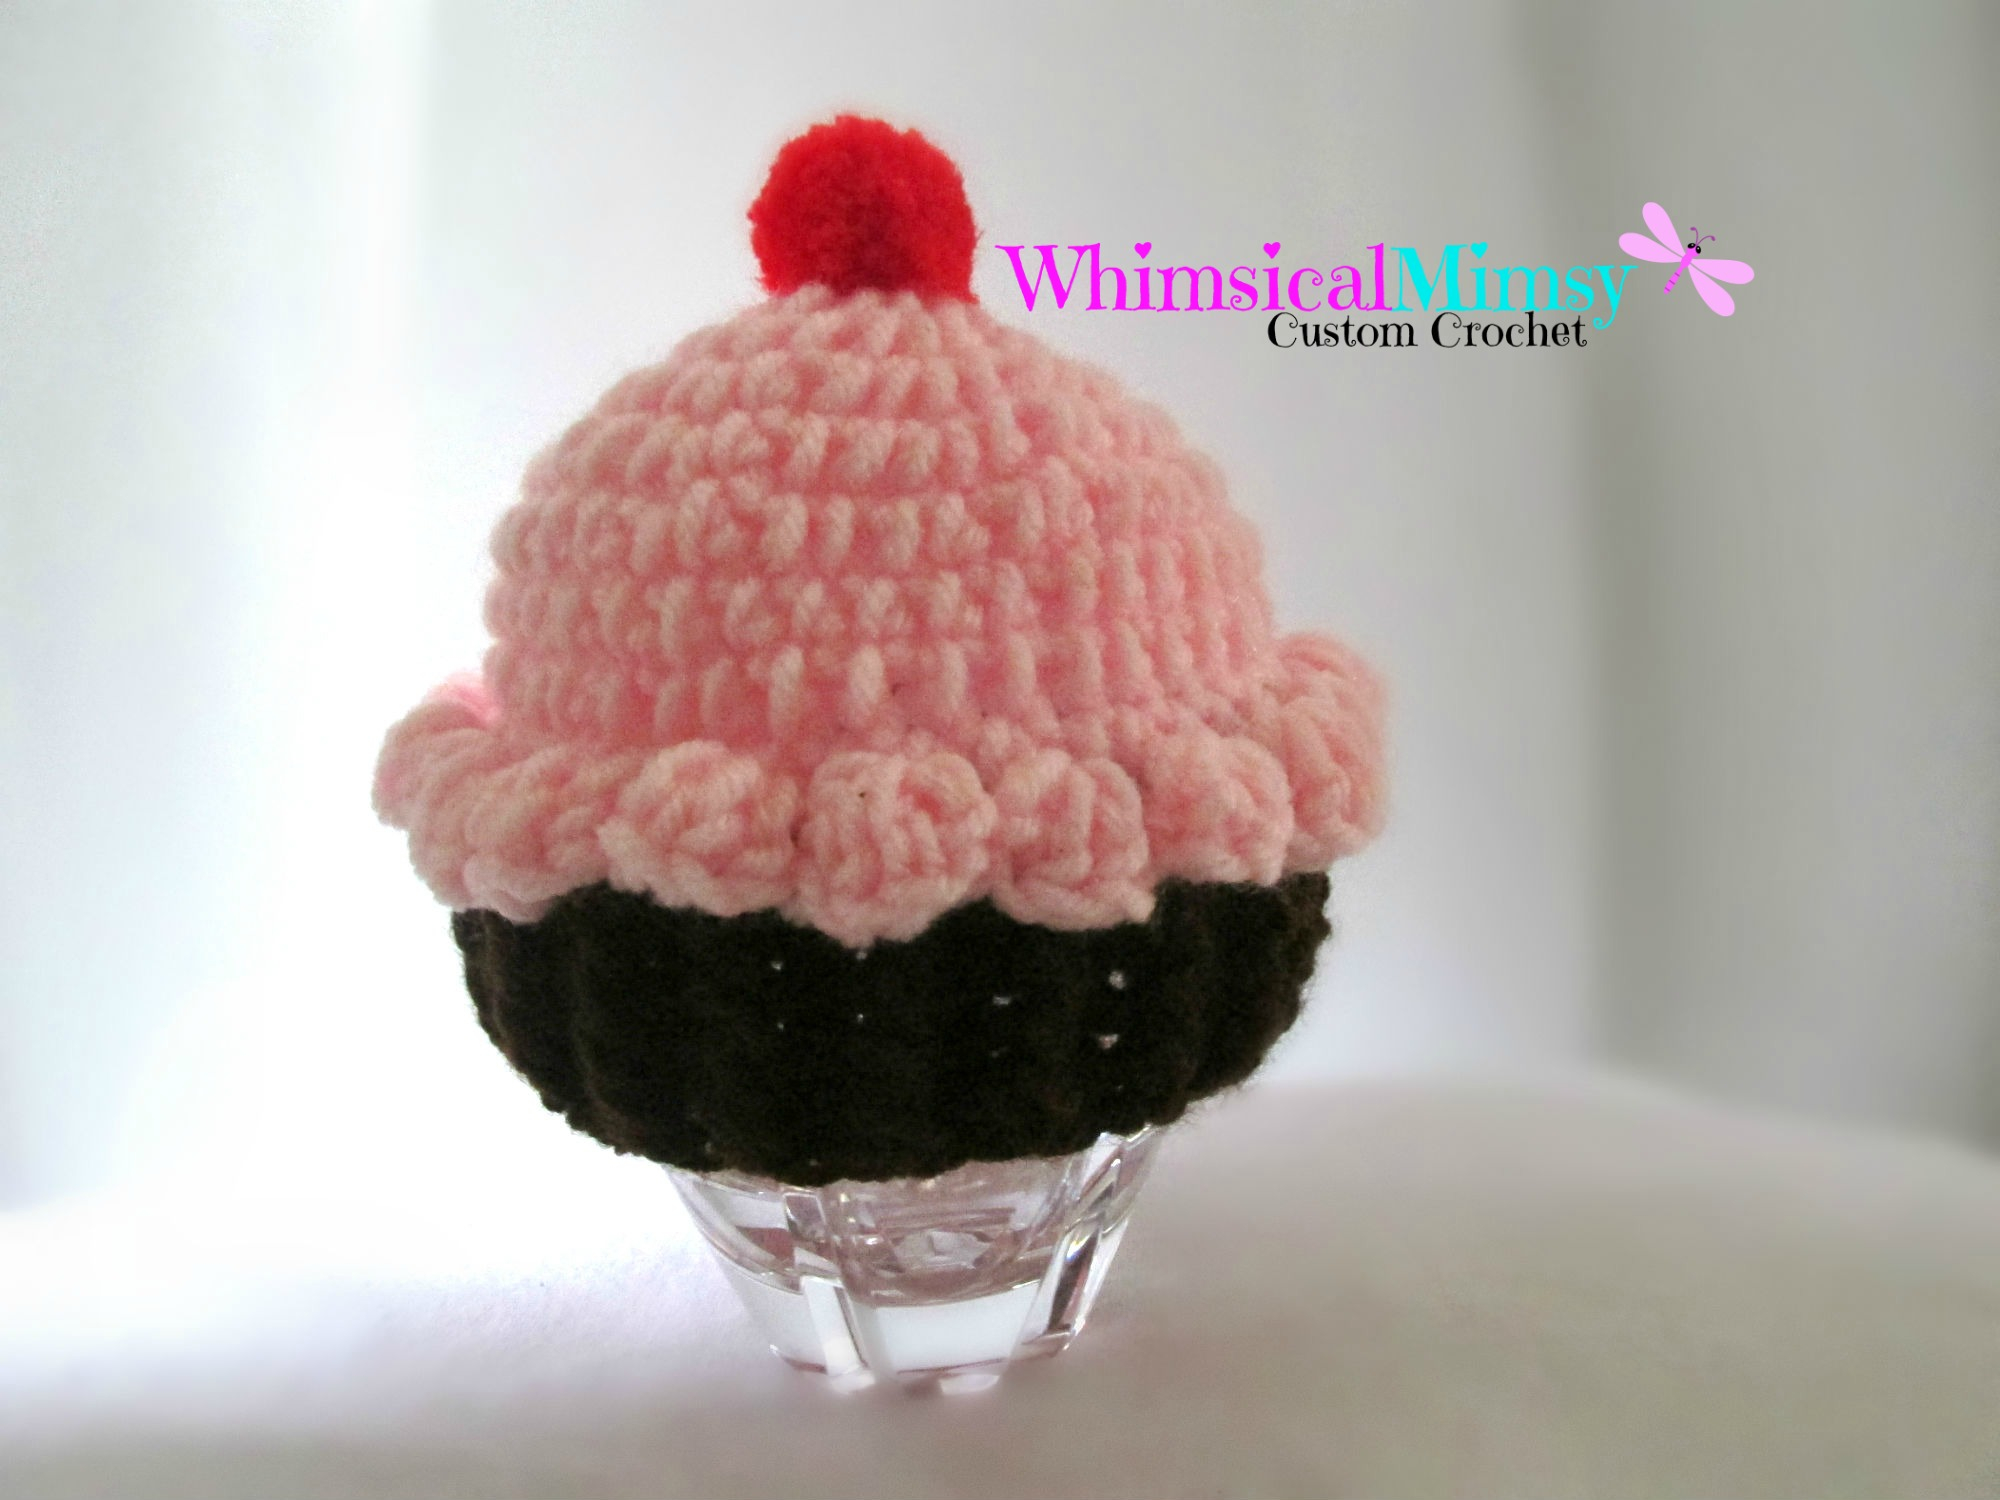 Knitted Cupcake Hat Pattern Crochet Ba Pink Cupcake Hat From Whimsical Mimsy